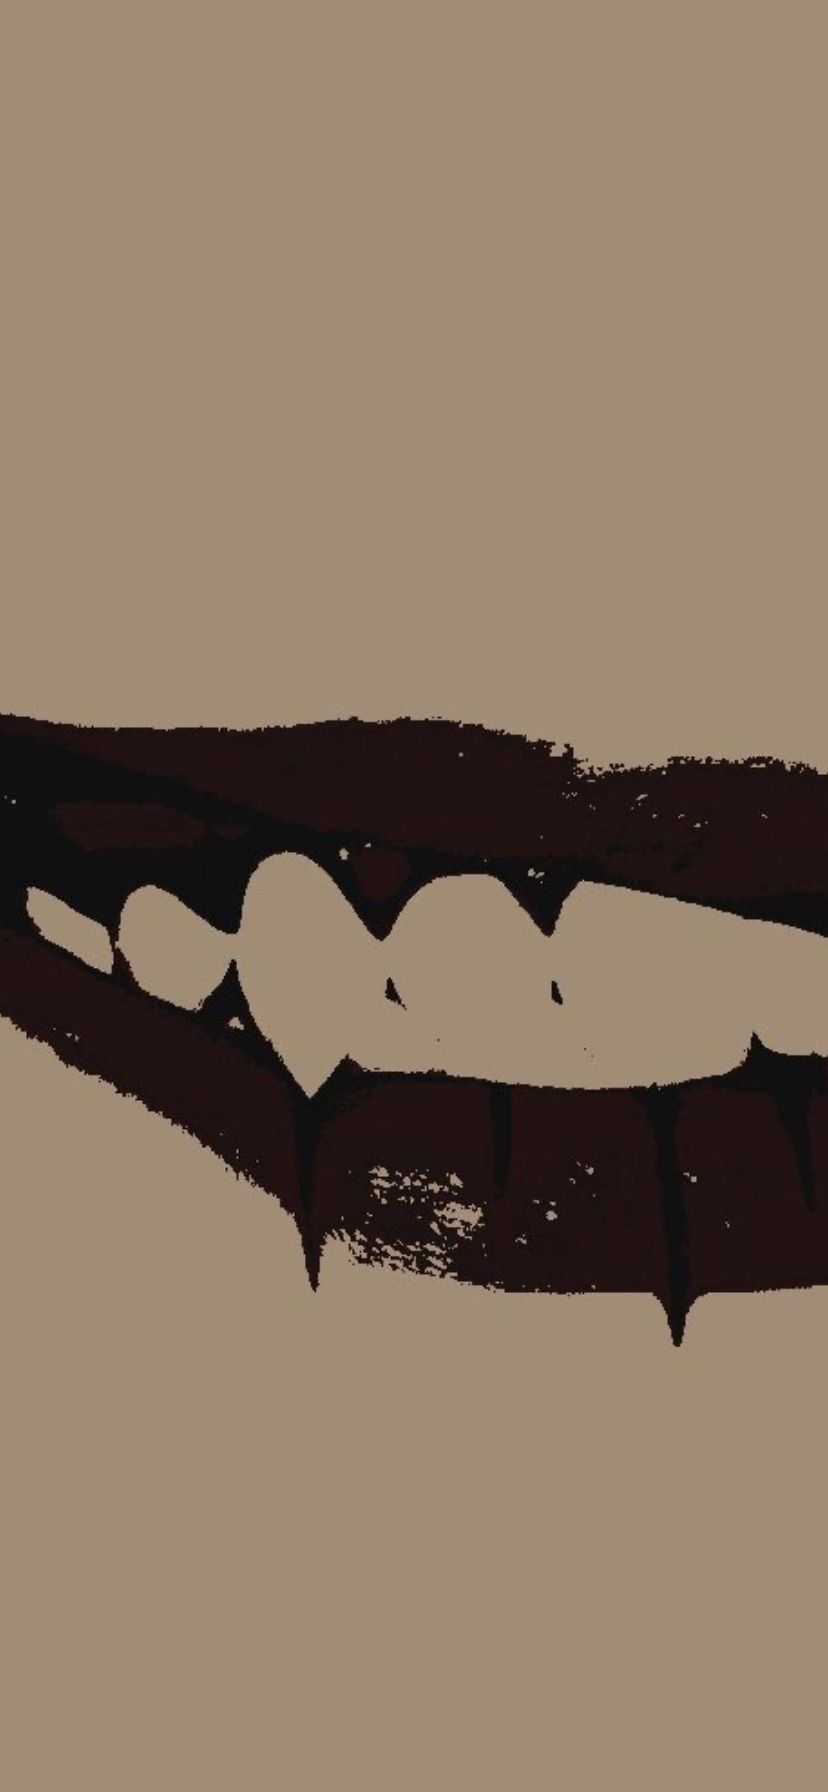 A close up of the mouth with teeth - Cream, vampire